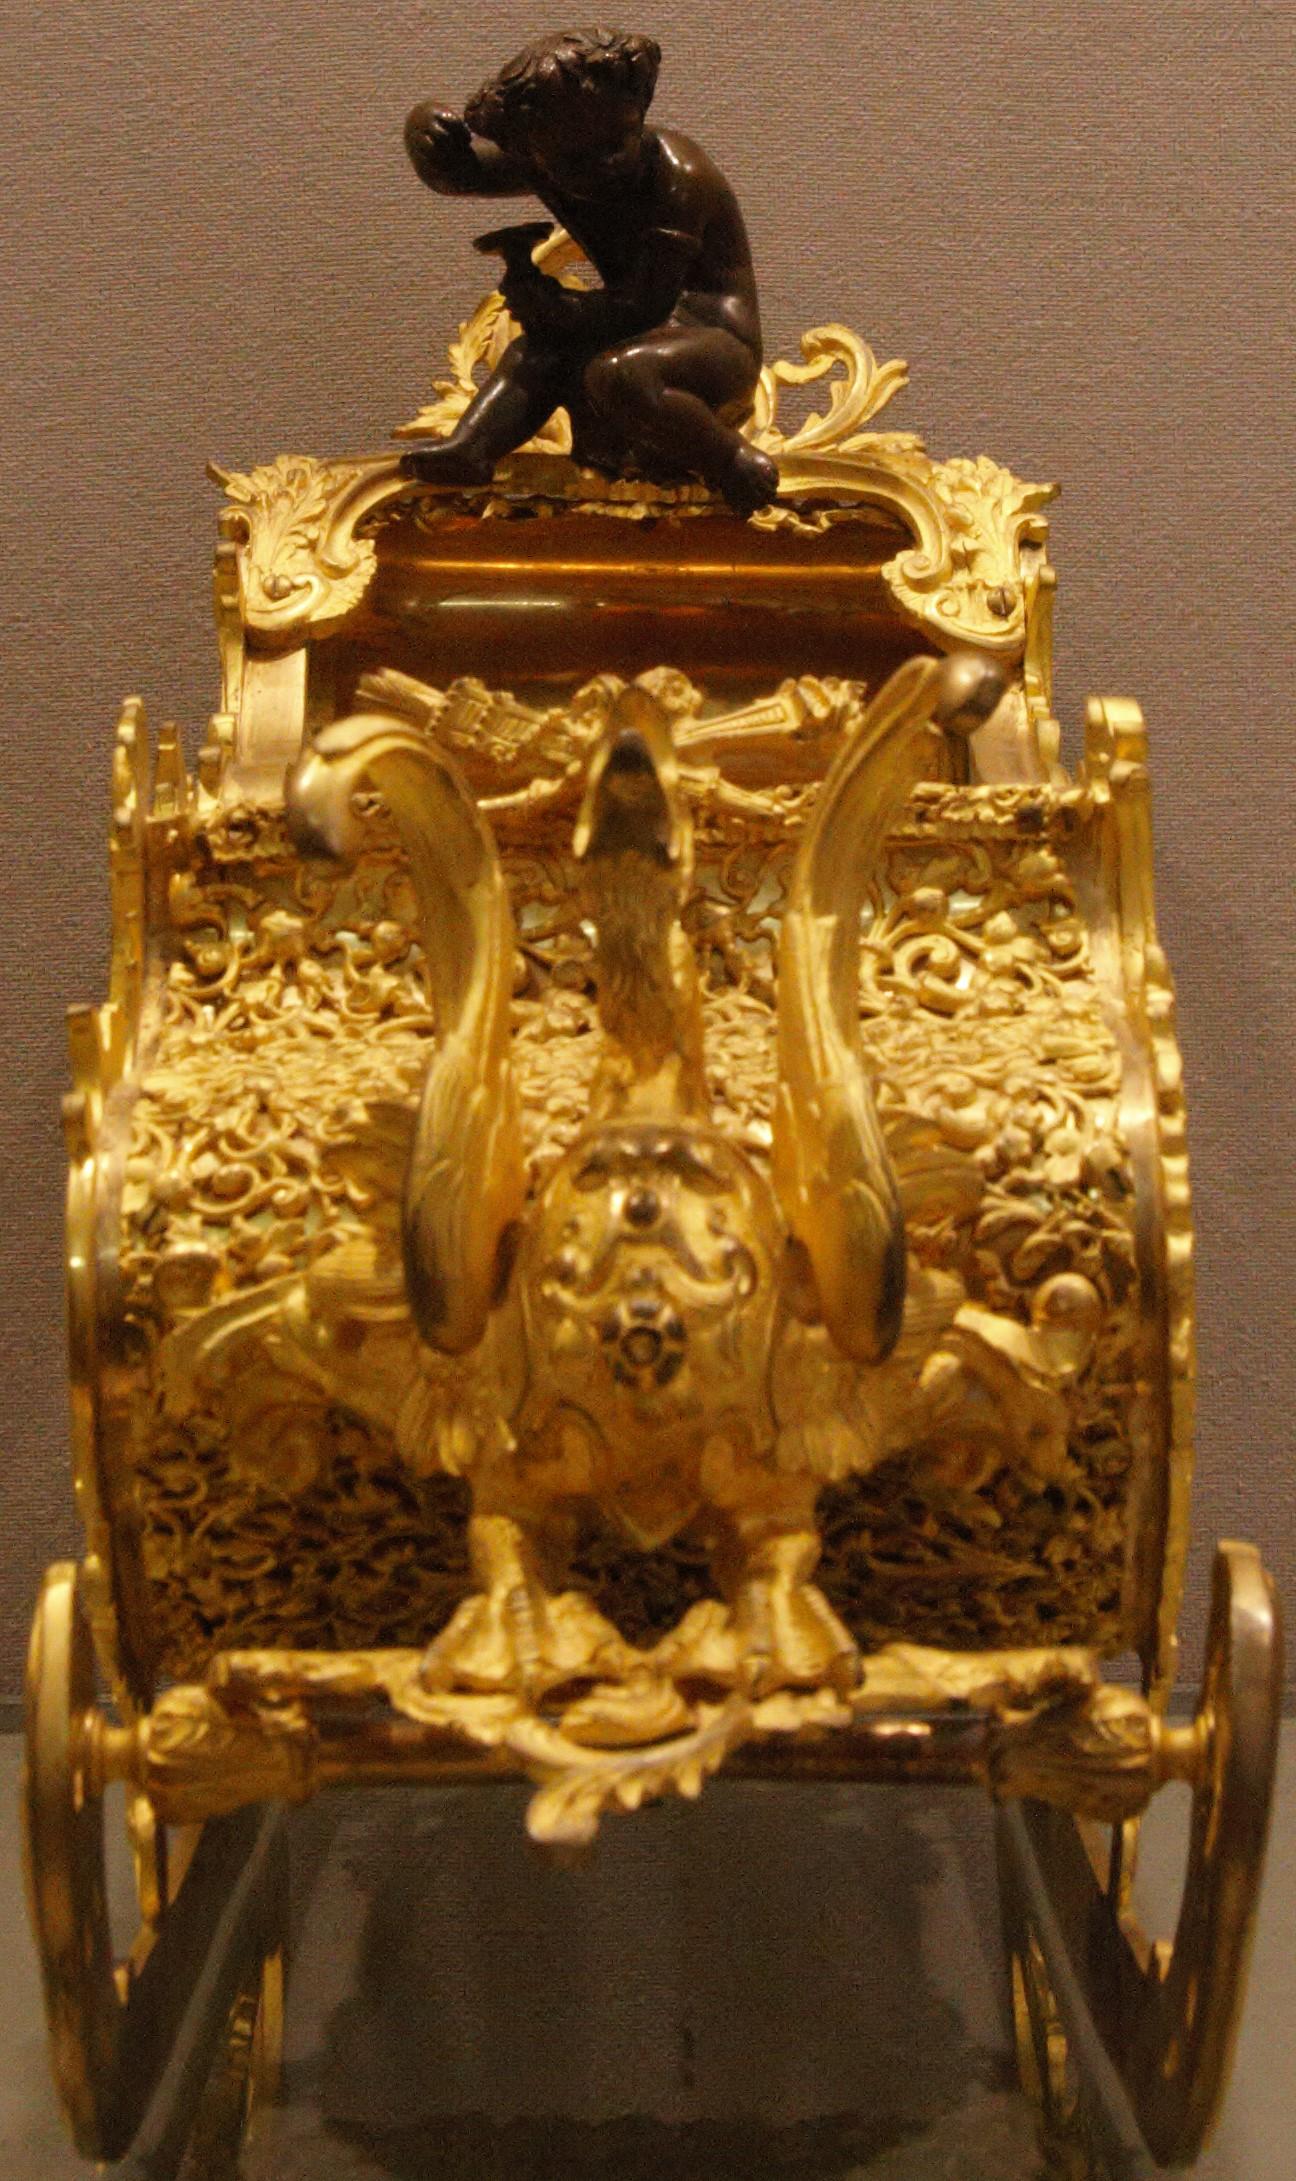 A French sled chariot bronze gilded and onyx centerpiece, circa 1890. It's chiselled with exquisite details.